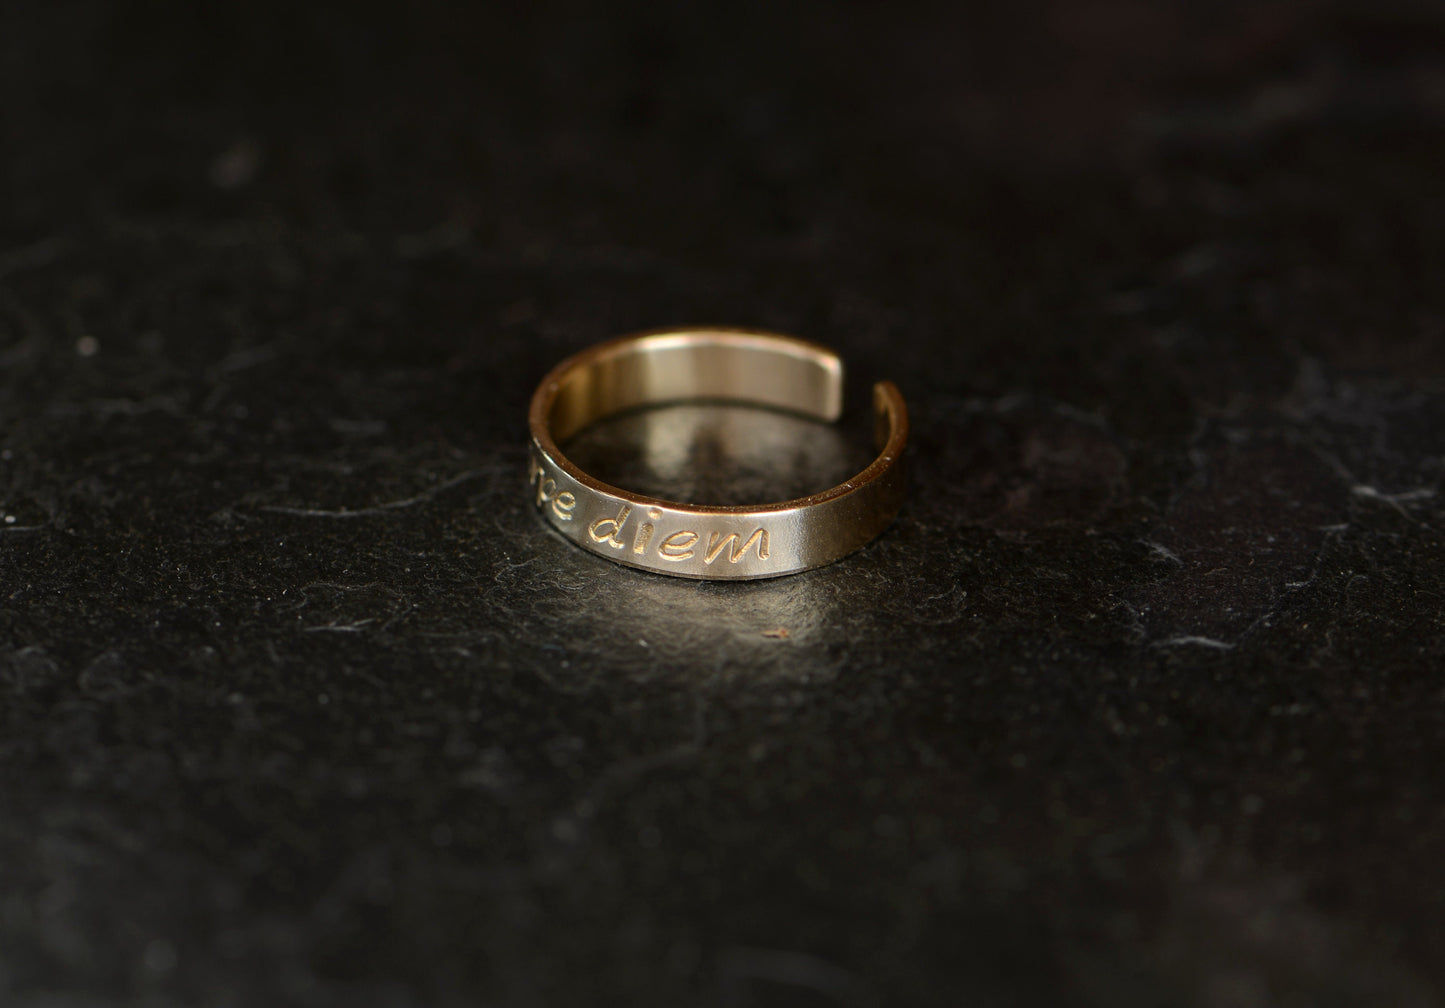 Yellow 14k gold toe ring stamped with carpe diem - can be worn as a midi ring or pinky ring